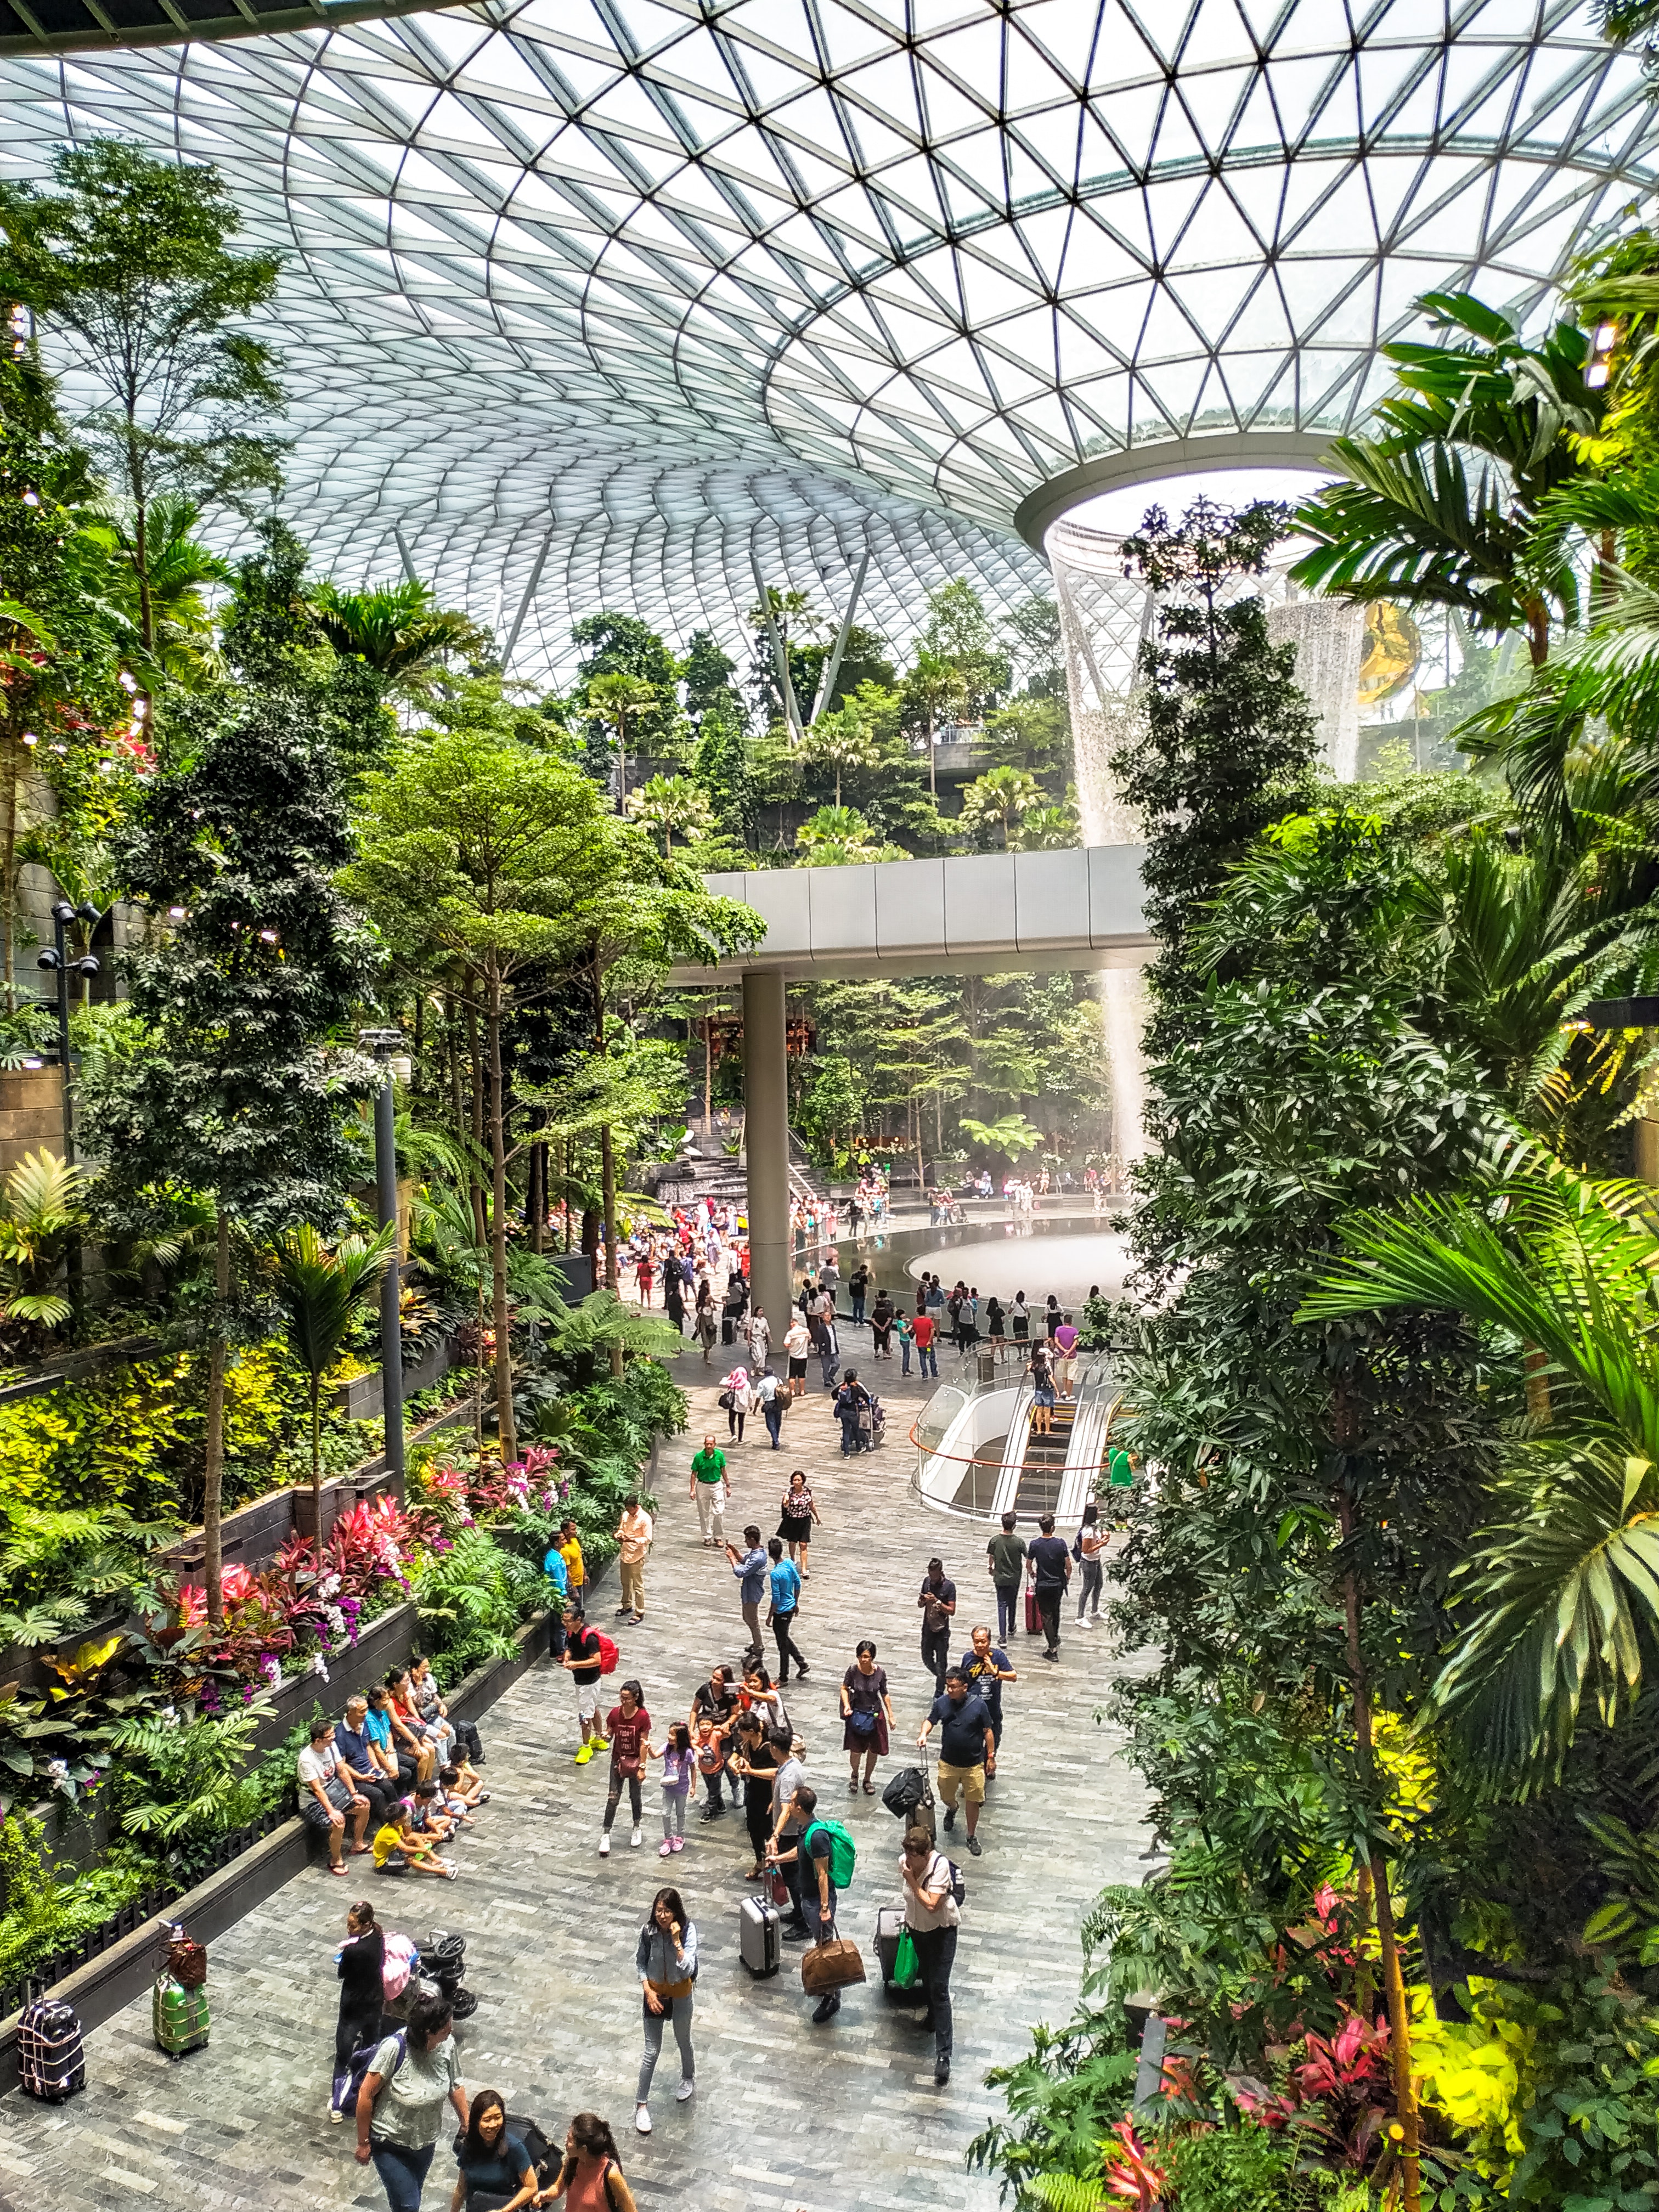 Why Singapore is a Great Study-Abroad Destination: Safe, Multicultural, and Thriving